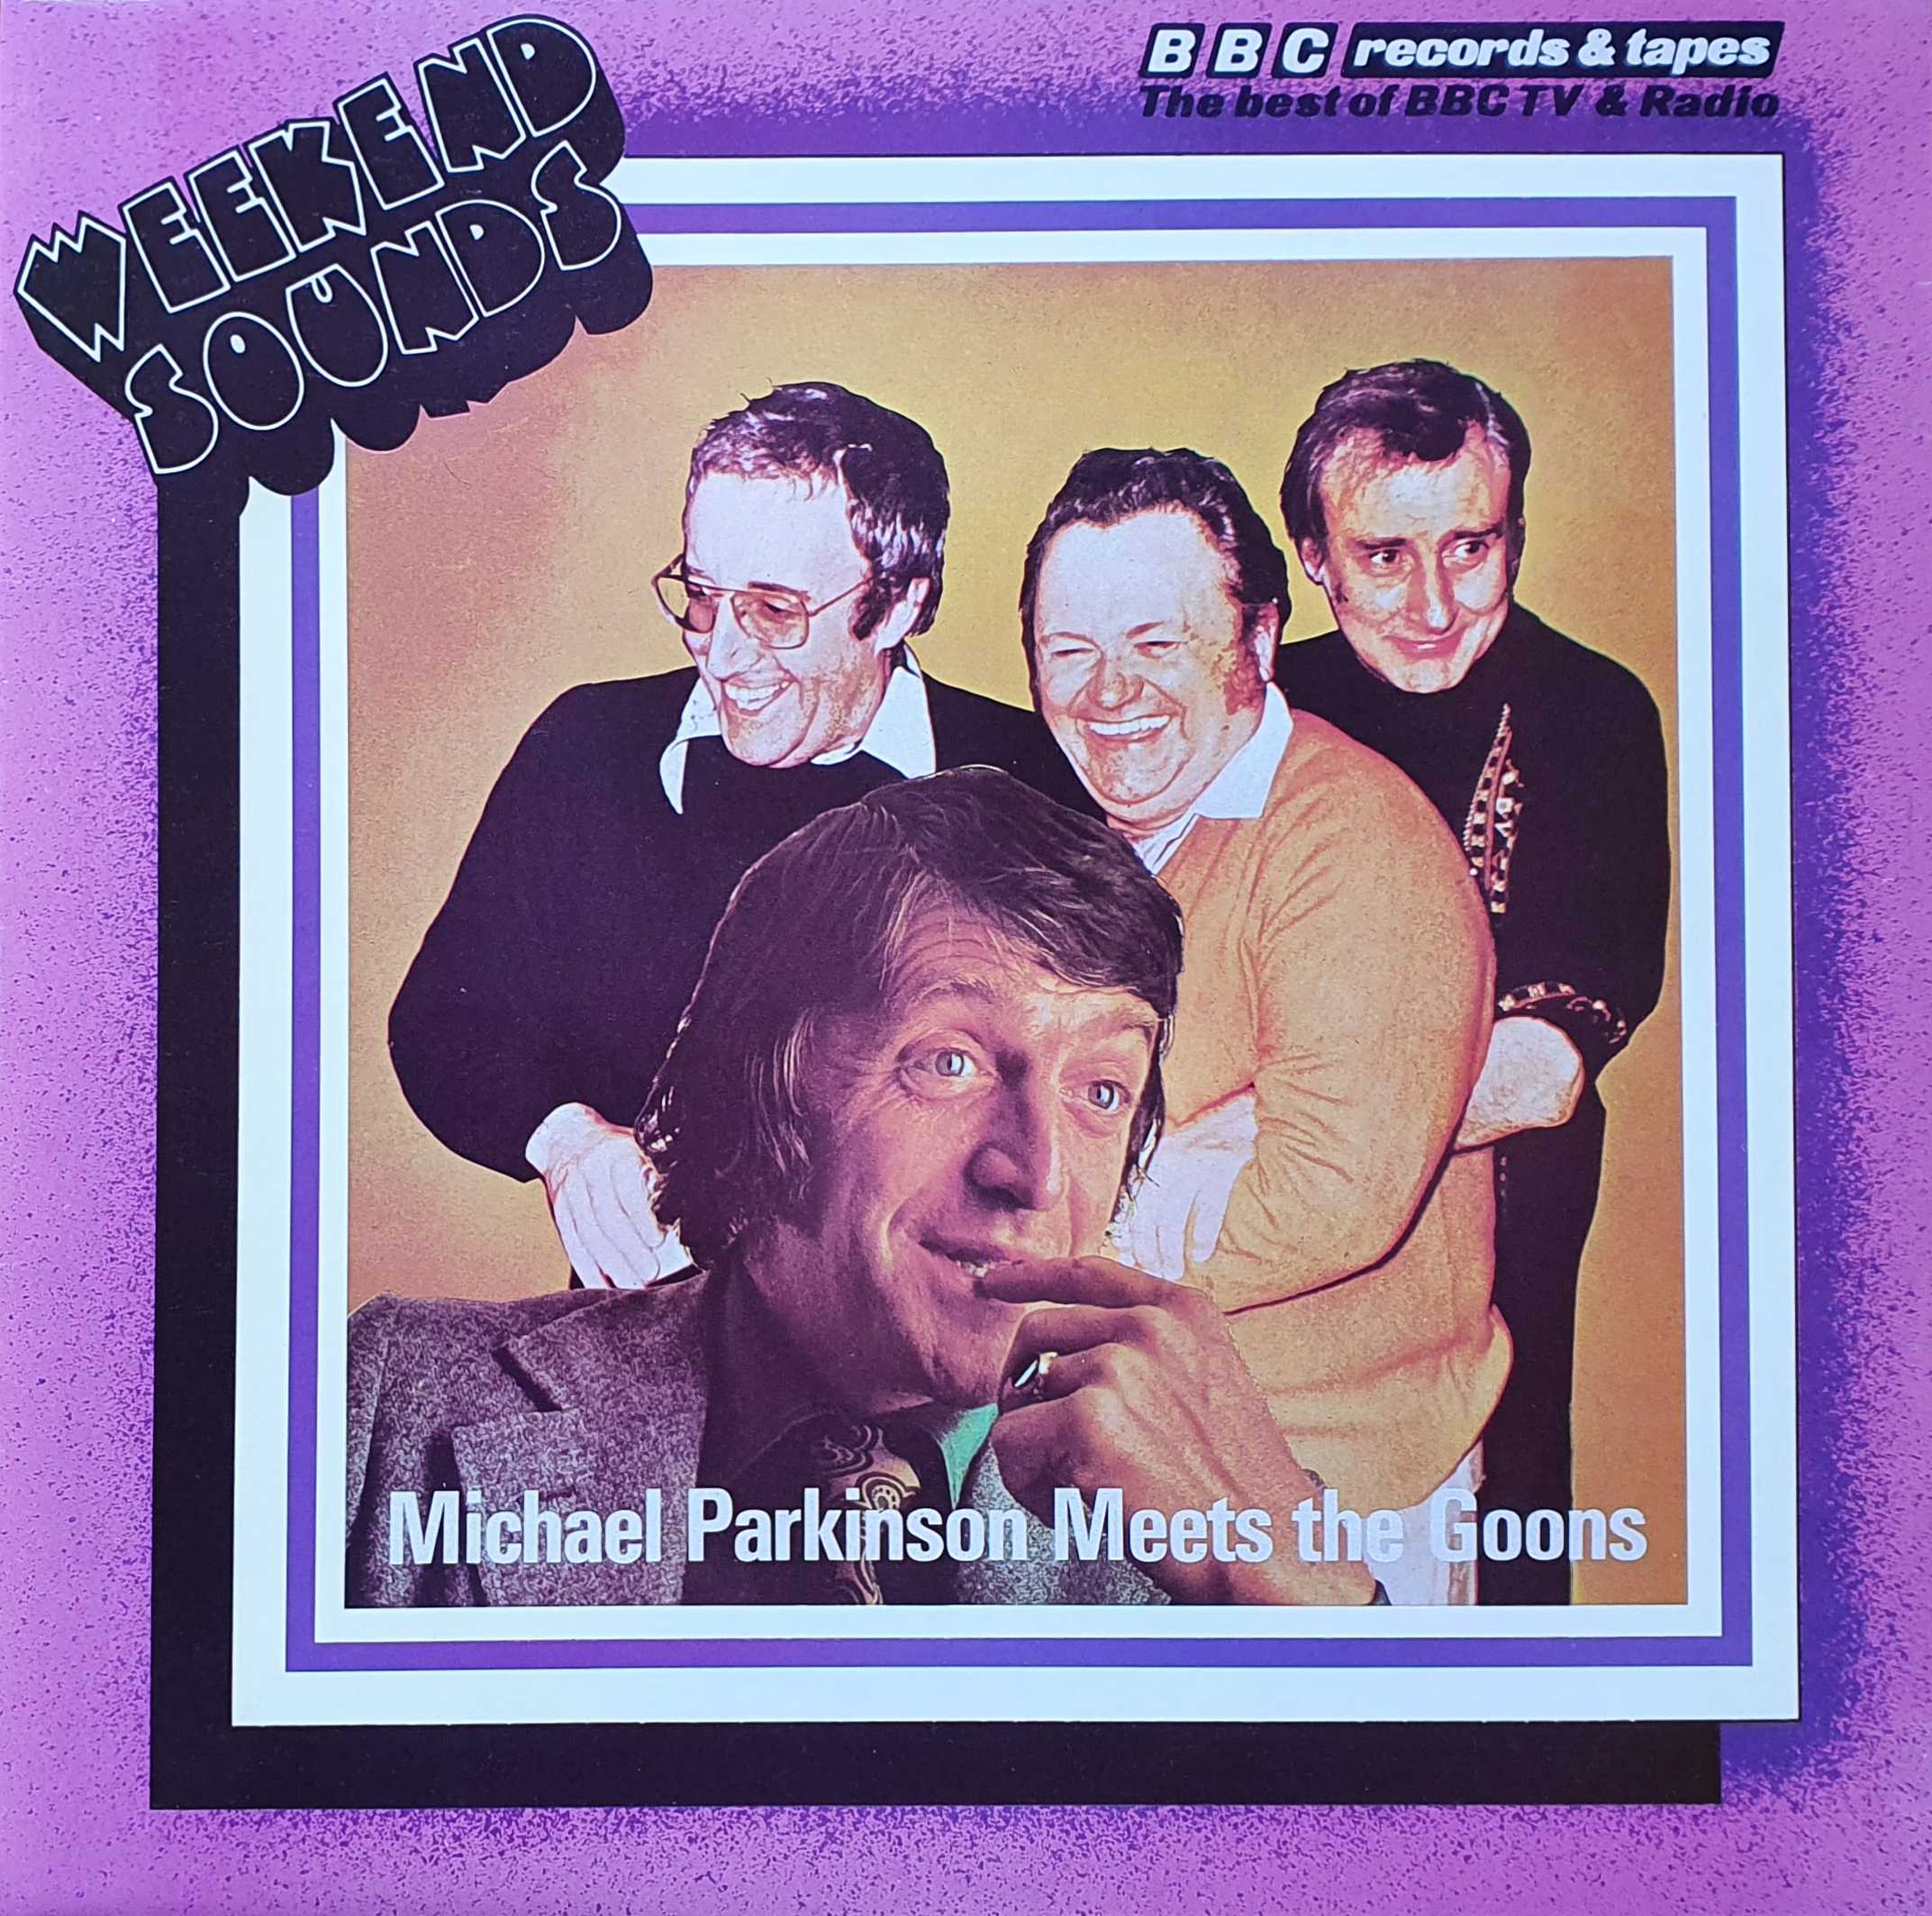 Picture of 821 494-1 Parkinson meets the Goons by artist Michael Parkinson from the BBC albums - Records and Tapes library